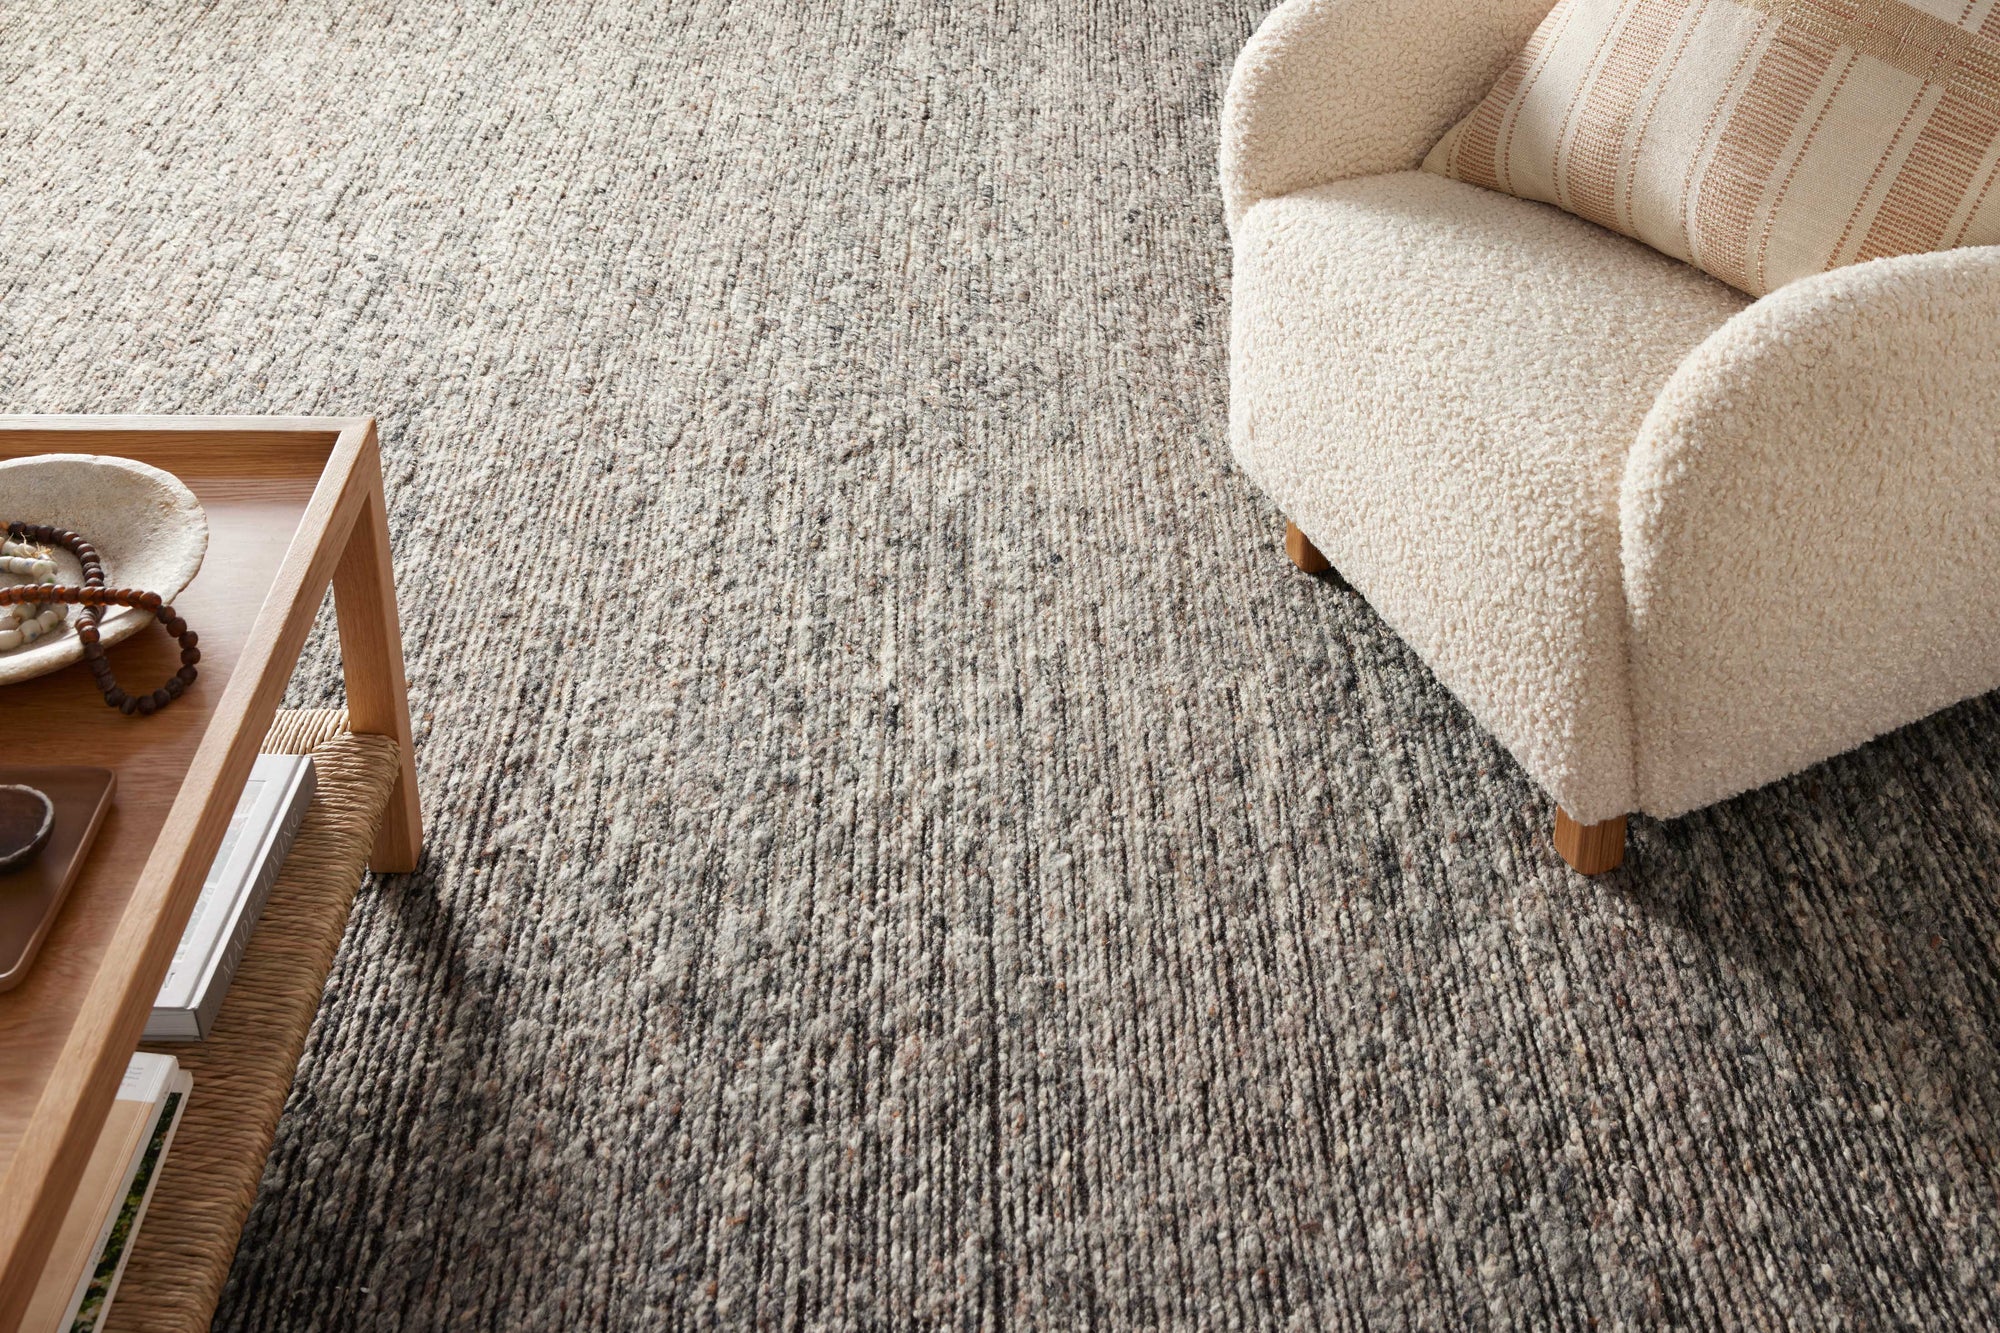 3 Things to Think About When Choosing a Rug: Color, Texture, and Size